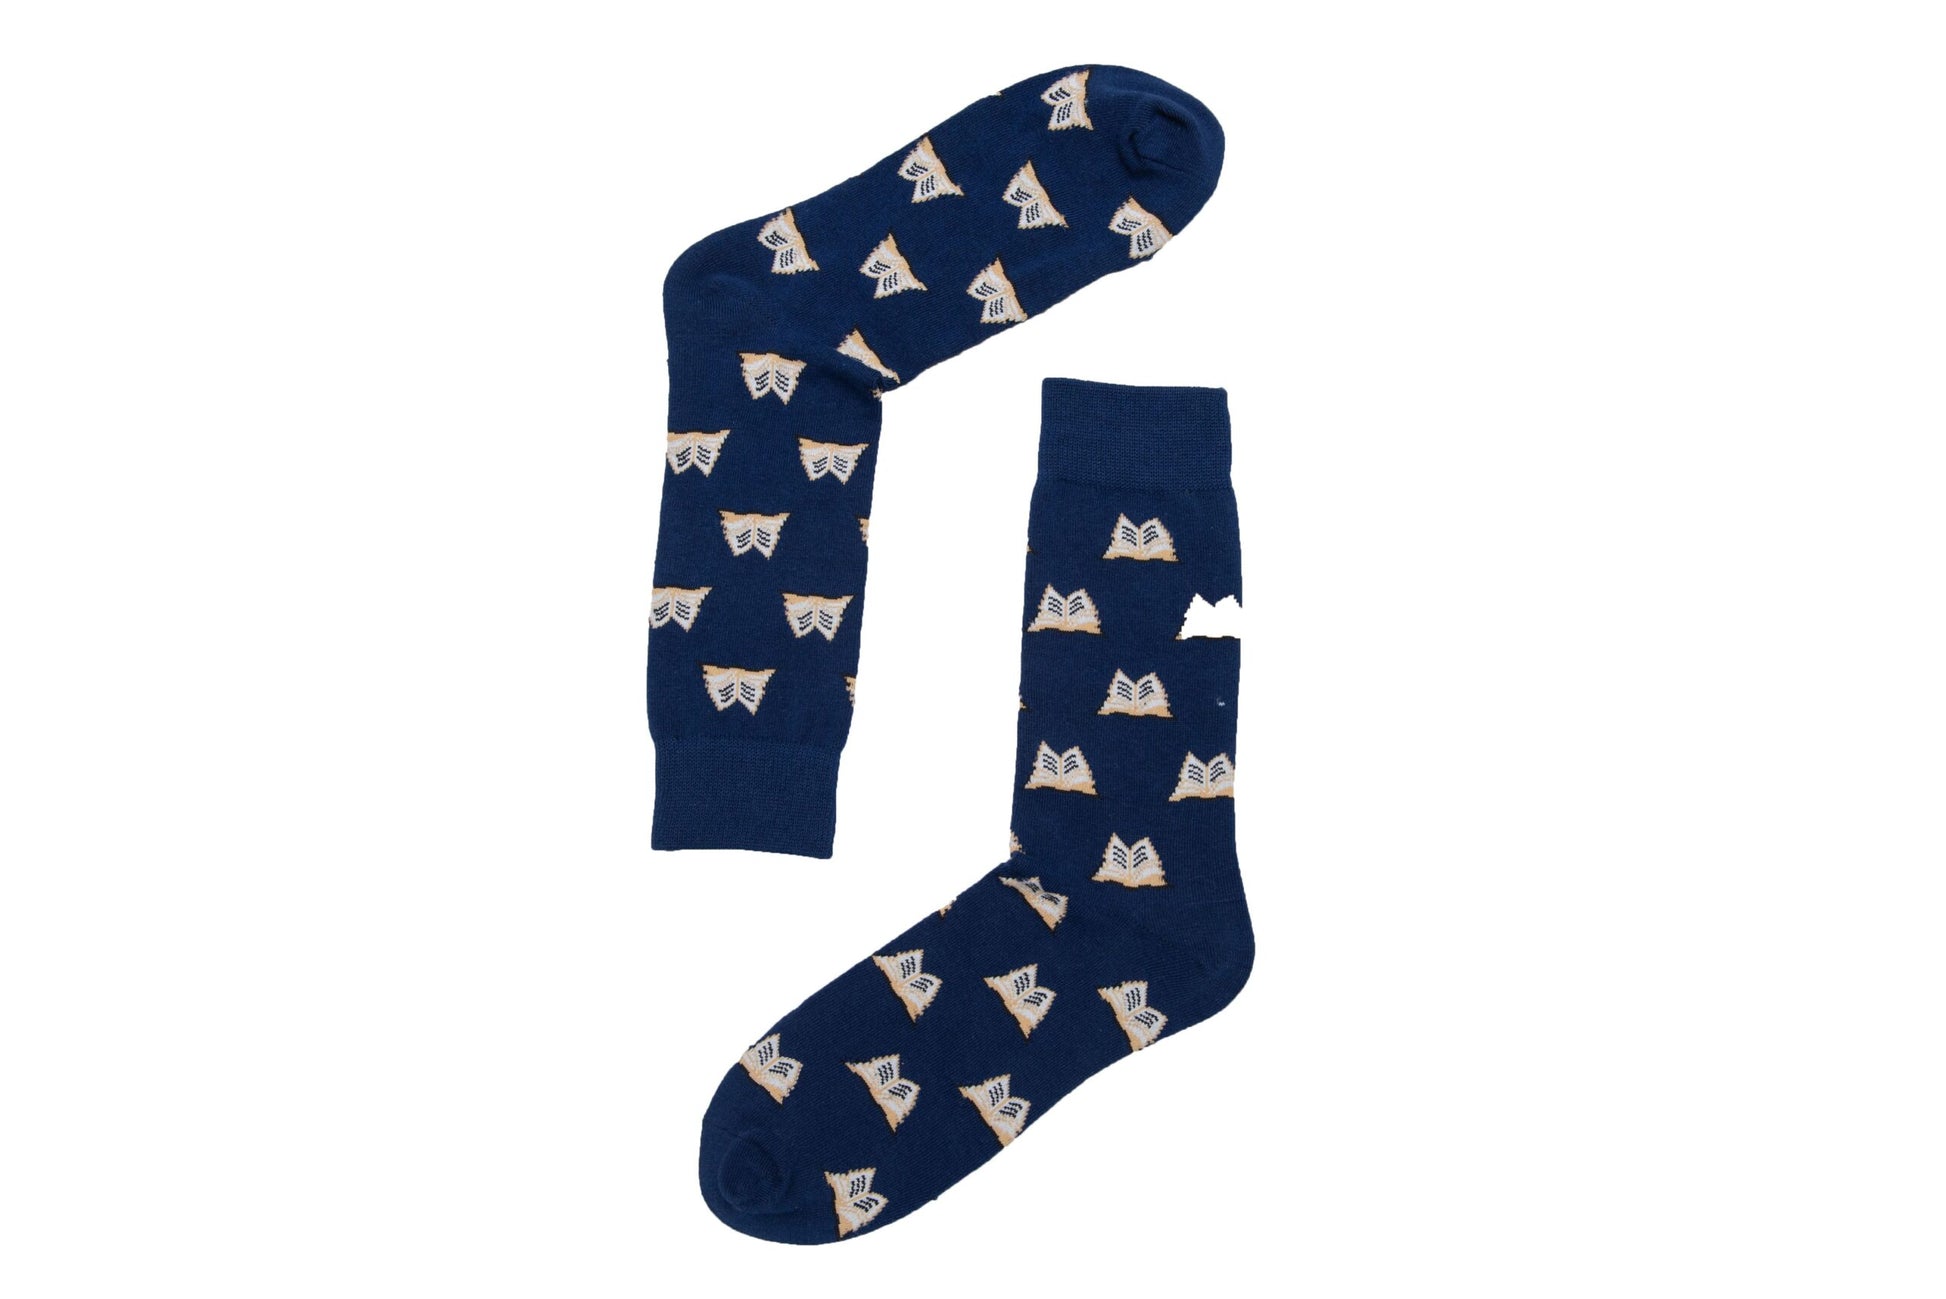 A pair of blue Book Socks with cat designs on them.